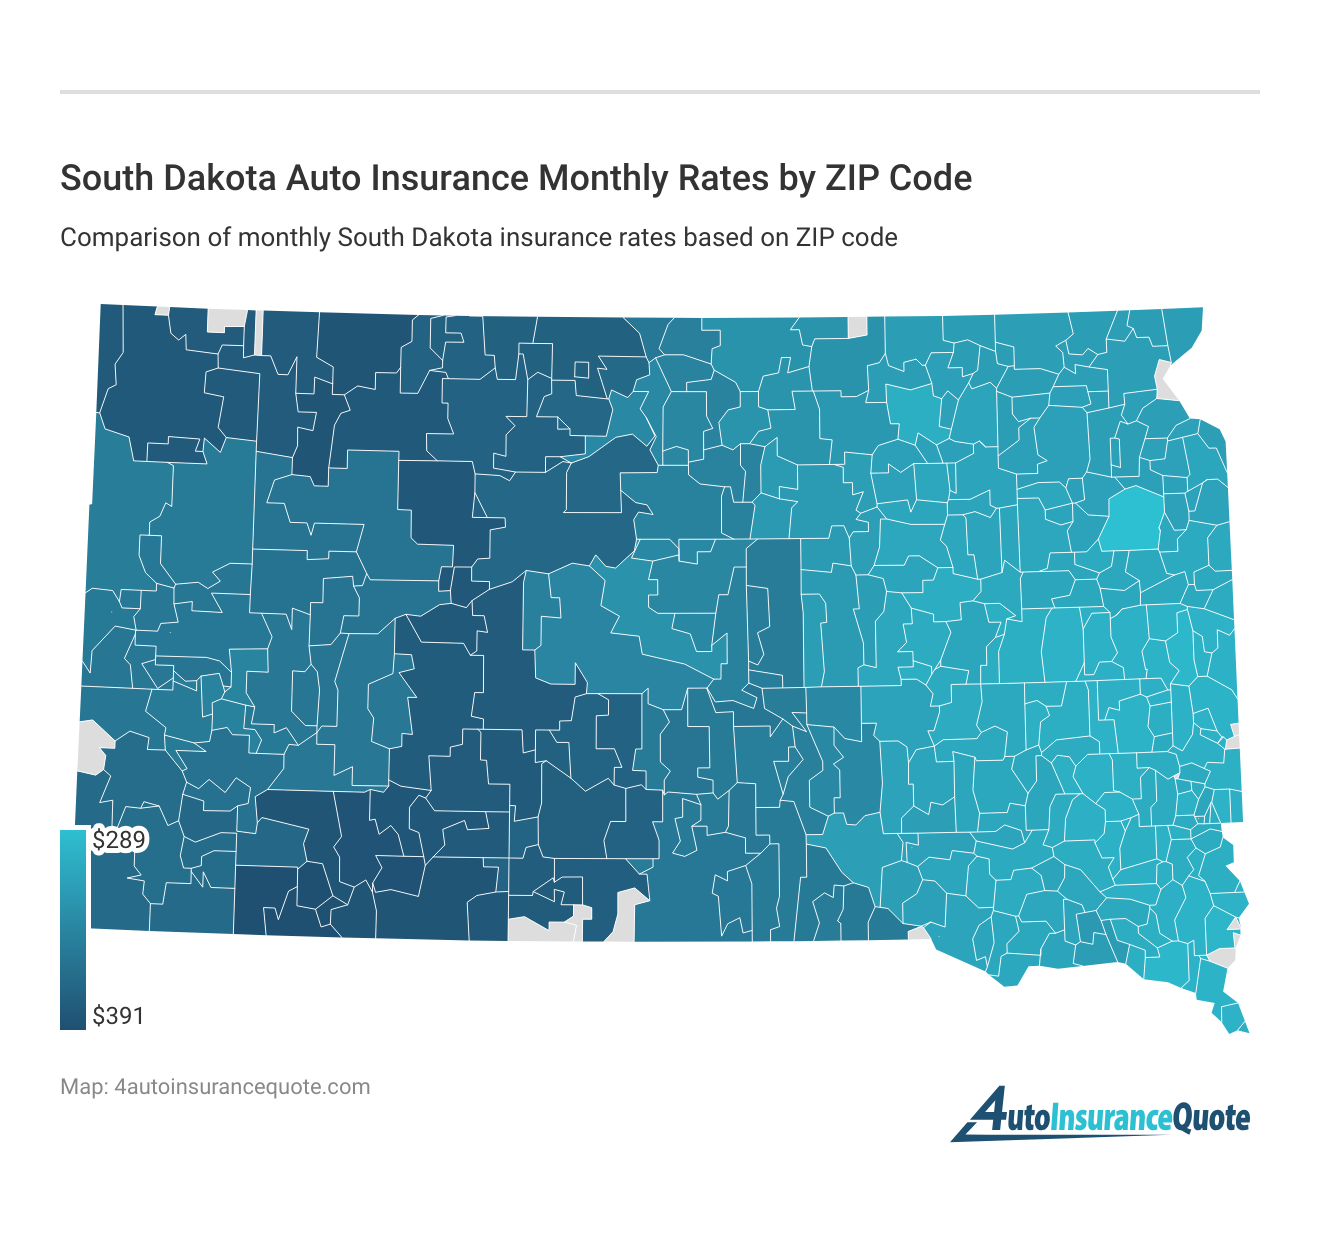 <h3>South Dakota Auto Insurance Monthly Rates by ZIP Code</h3>